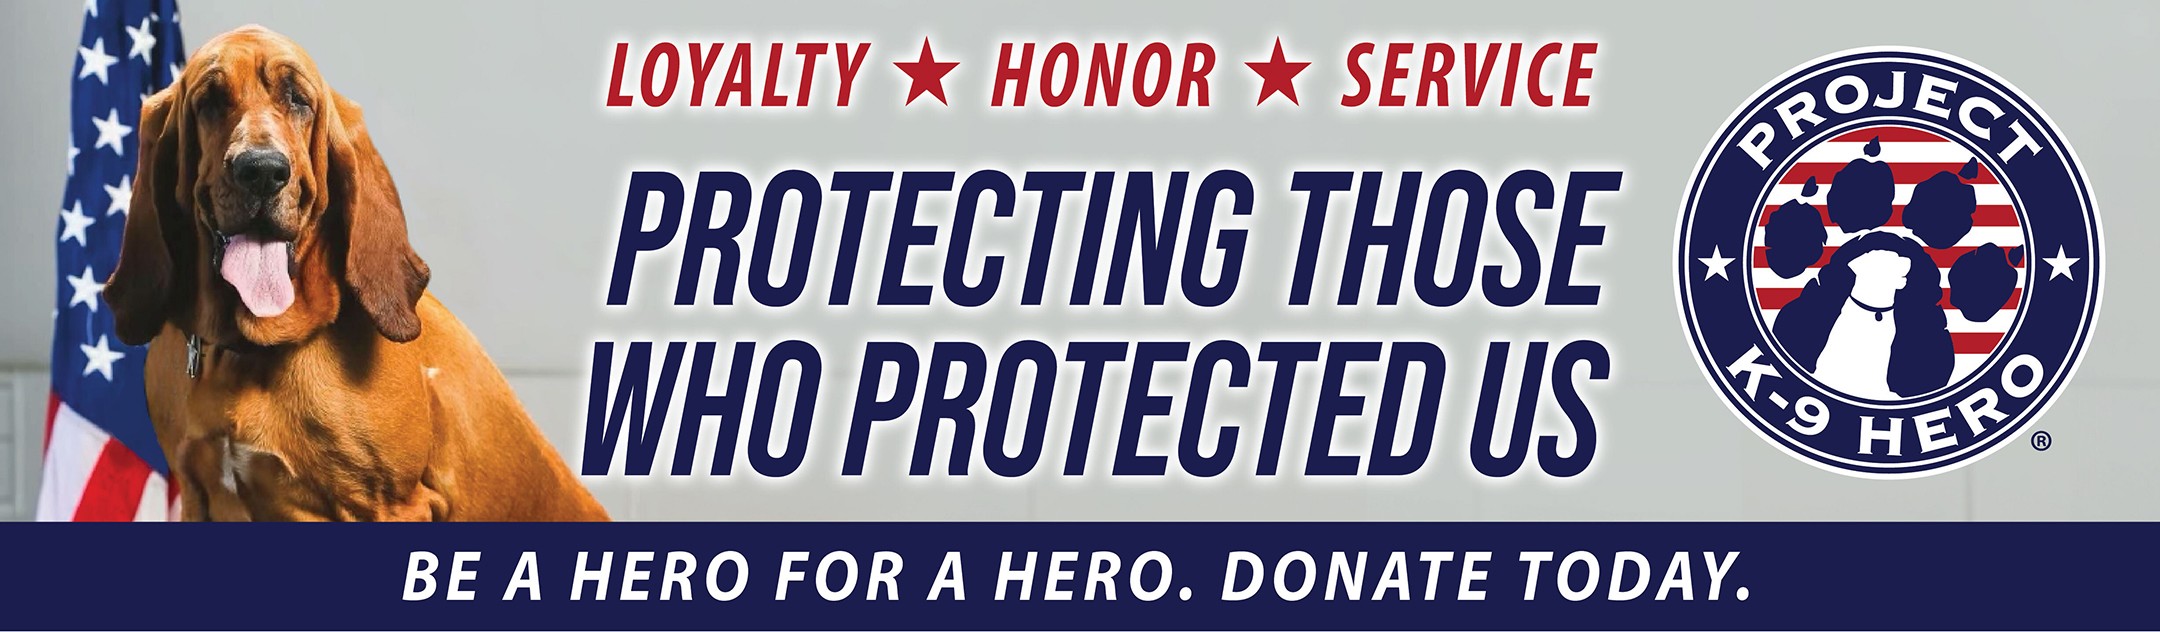 Loyalty Honor Service. Protecting Those Who Protected Us. Be a Hero for a Hero. Donate Today. Project K-9 Hero